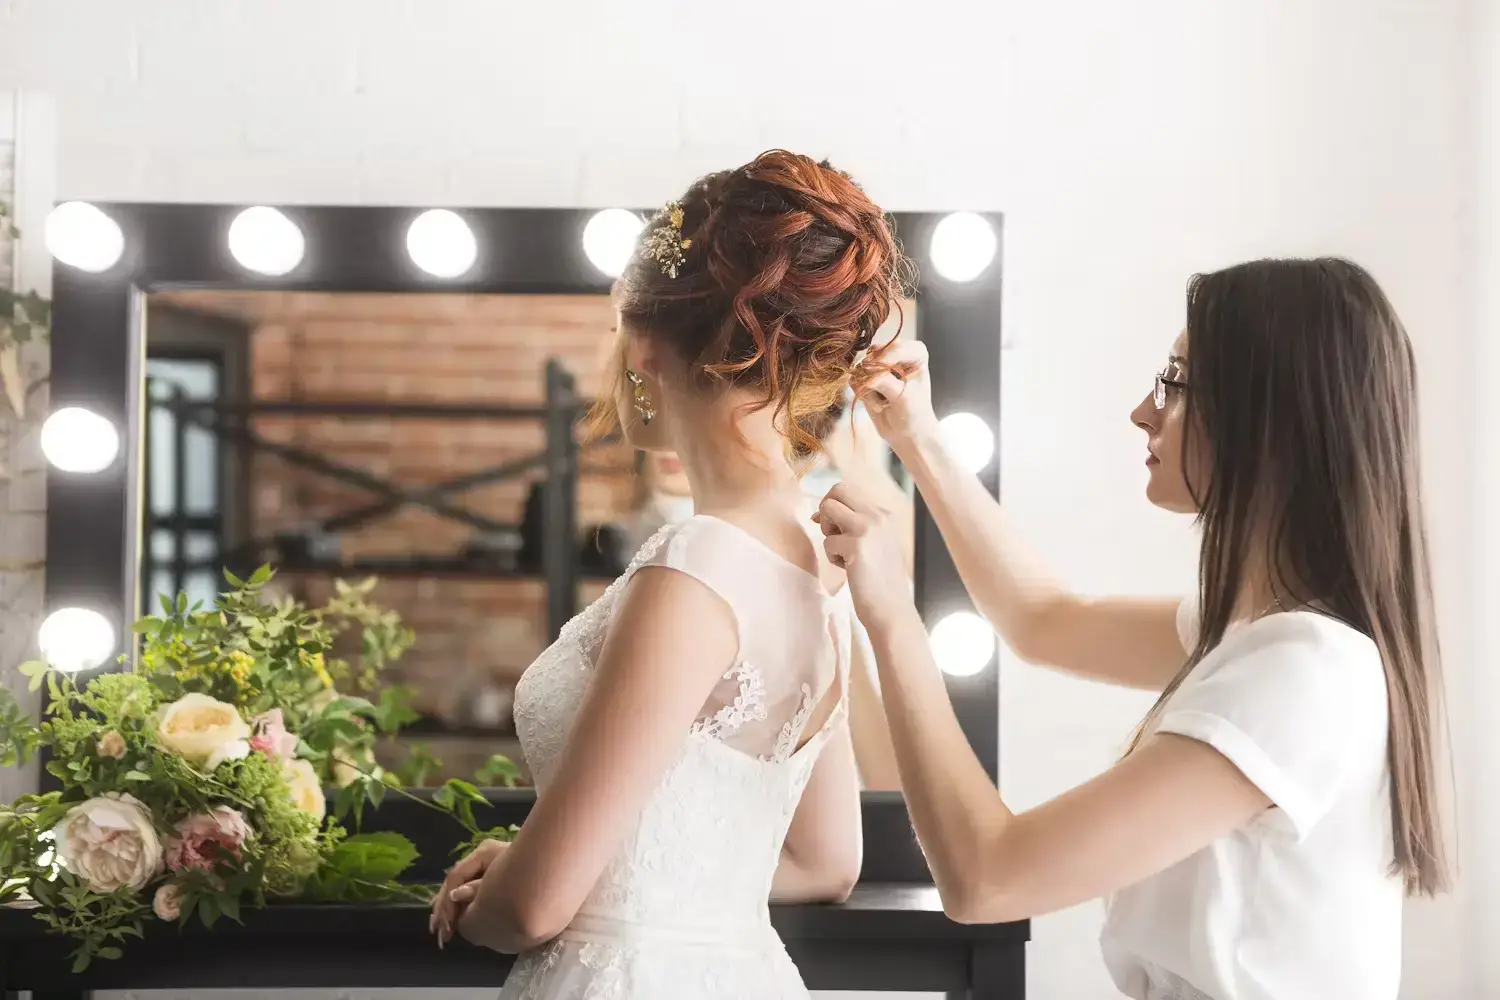 Stylist creating an updo for a bride in a salon.